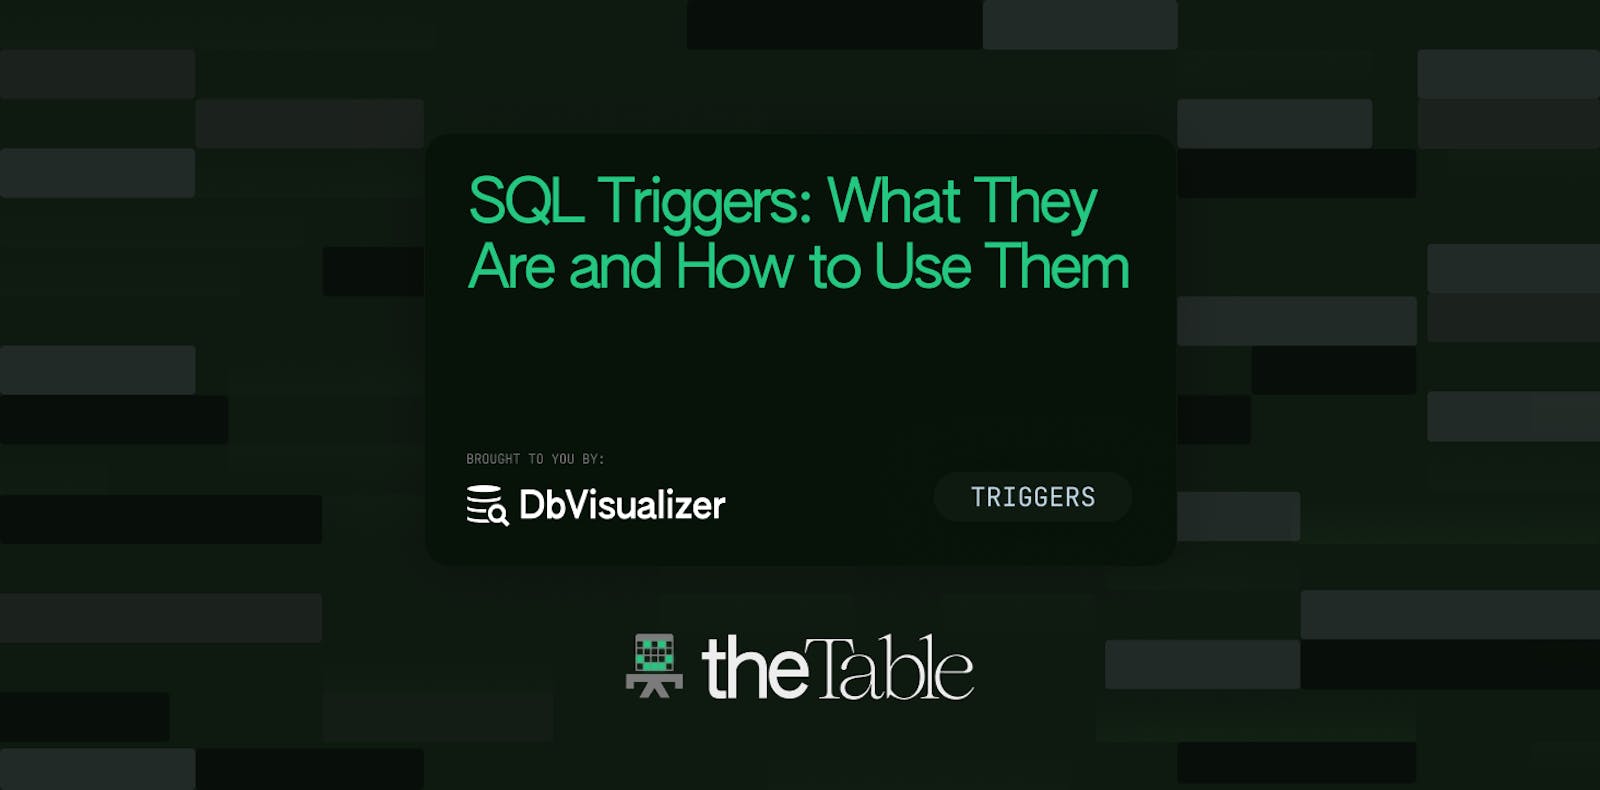 SQL Triggers: What They Are and How to Use Them